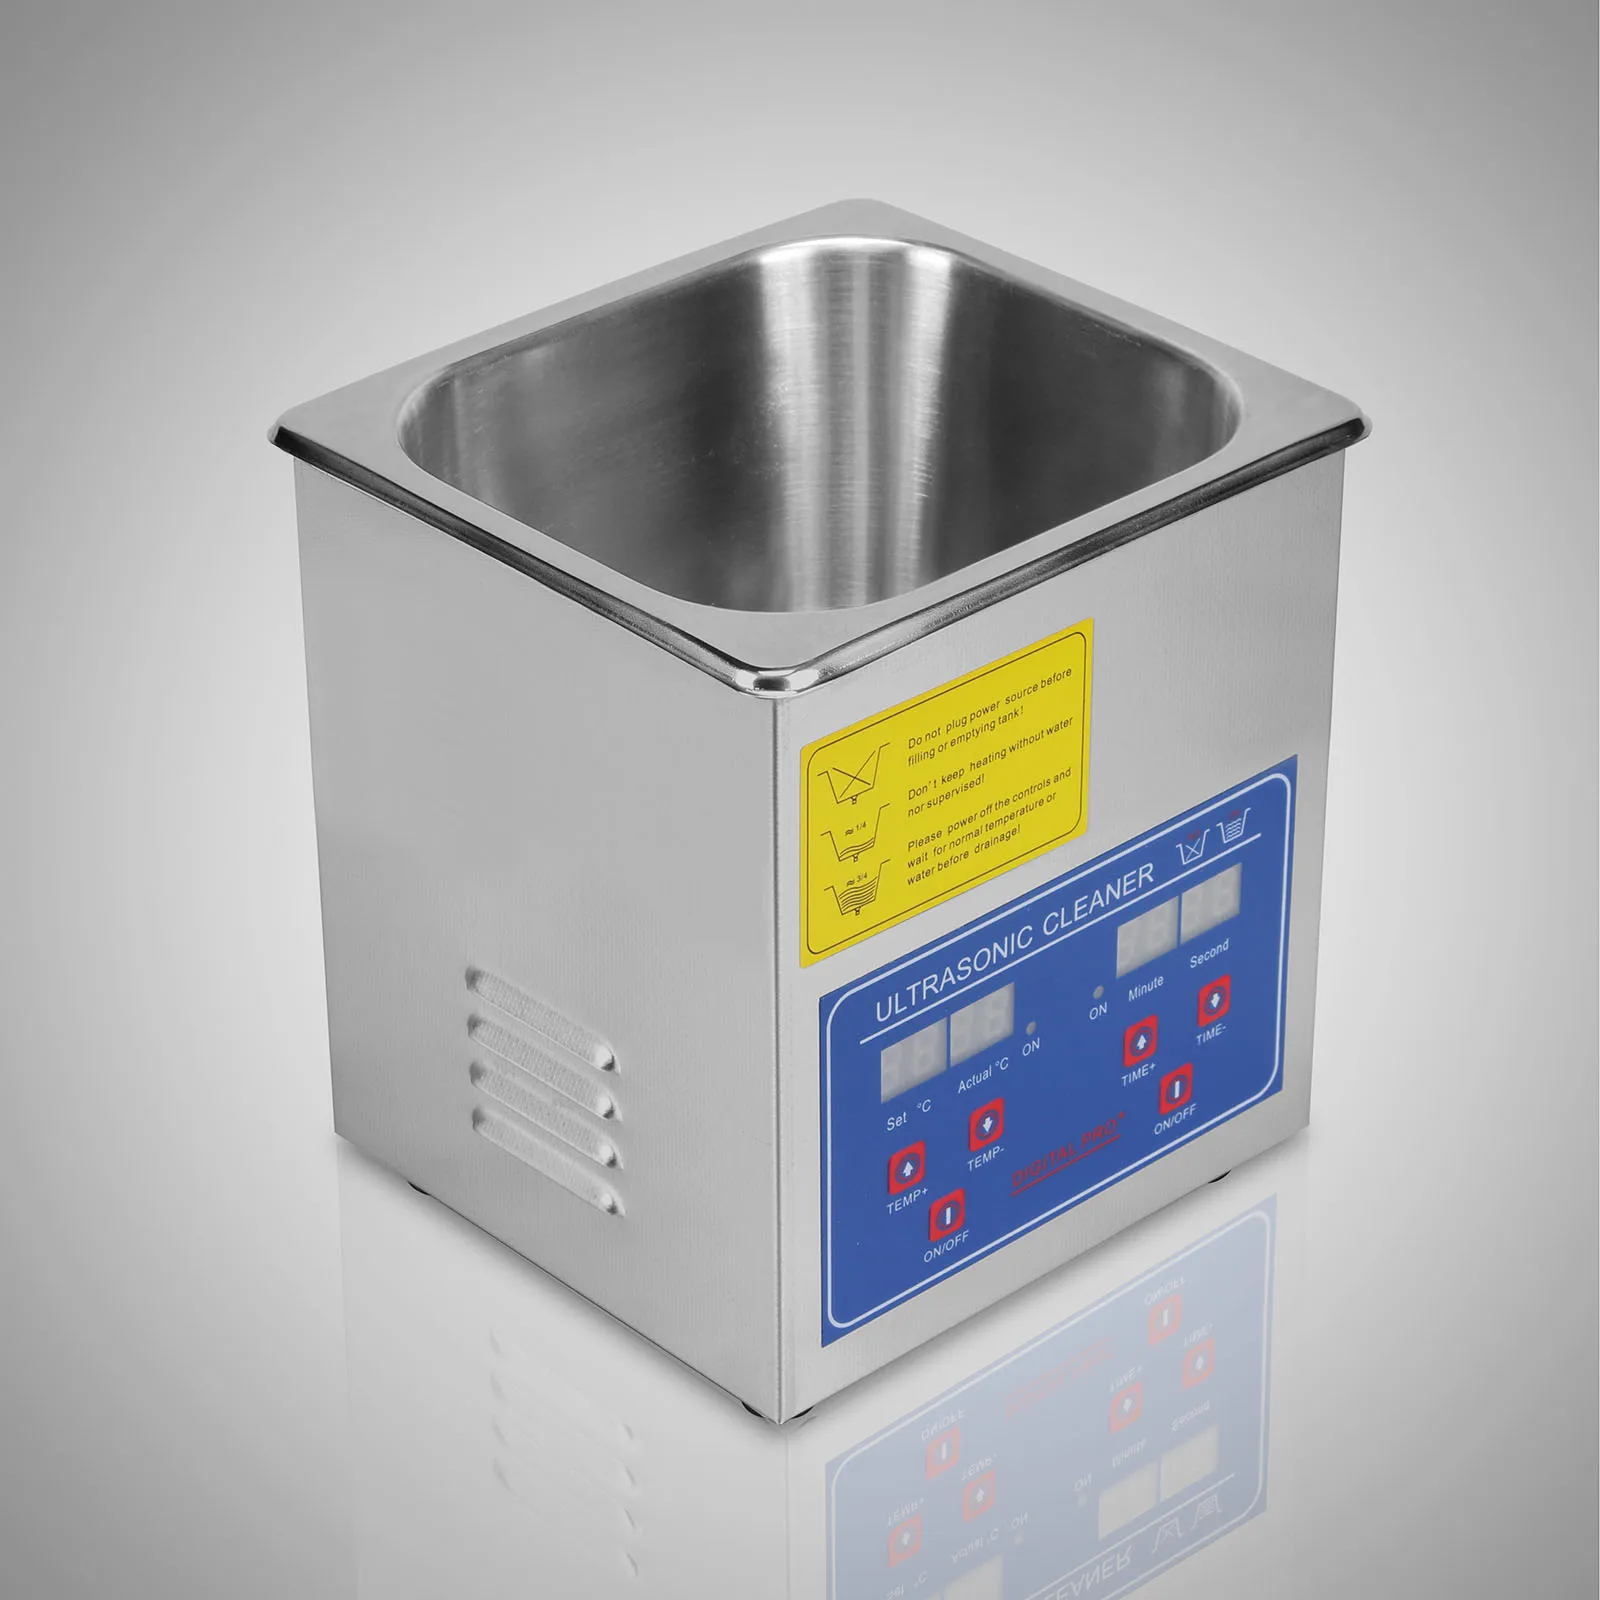 ultrasonic cleaner with 60 minute timer cycle